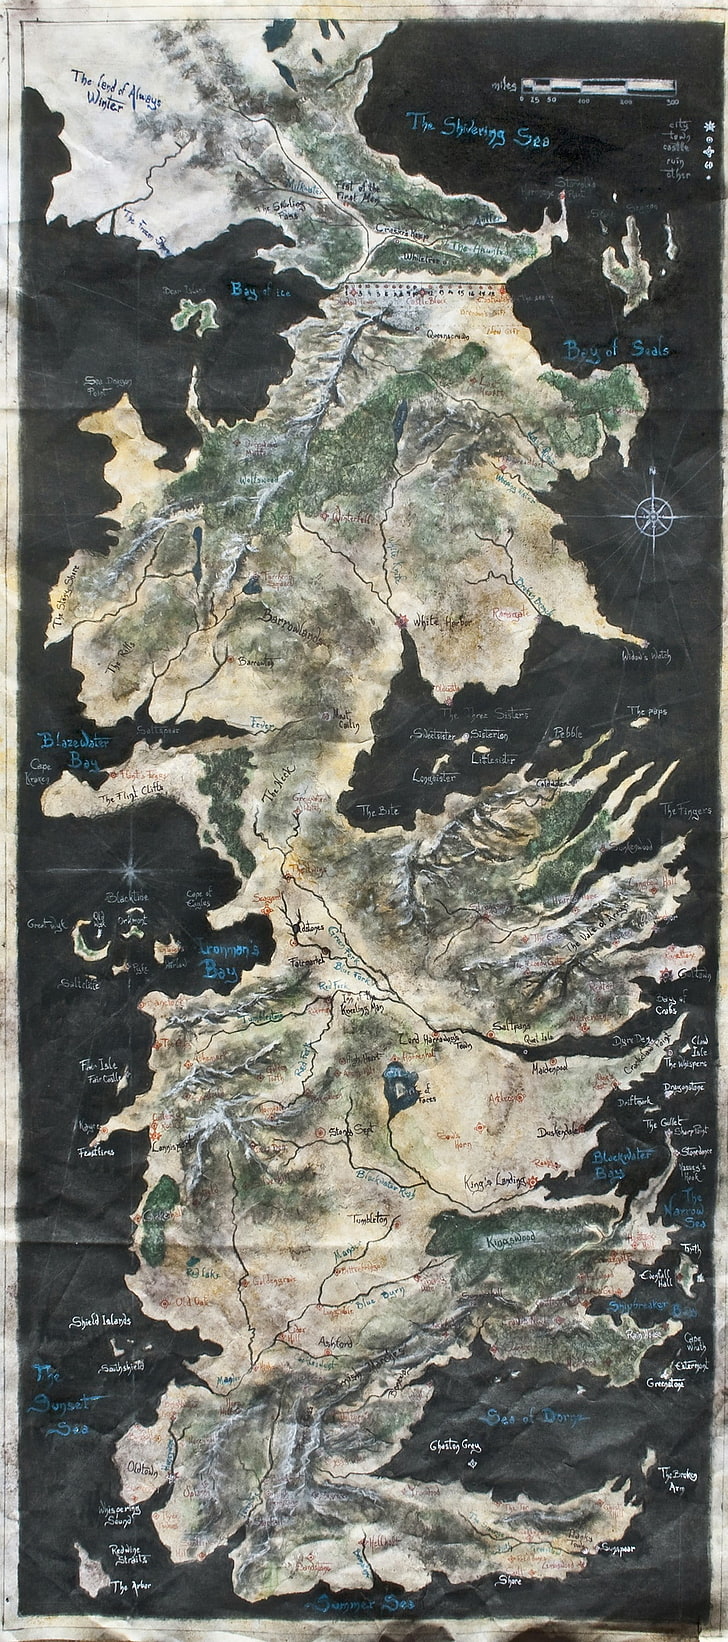 books maps game of thrones a song of ice and fire tv series westeros george r r martin 1330x300 Entertainment TV Series HD Art